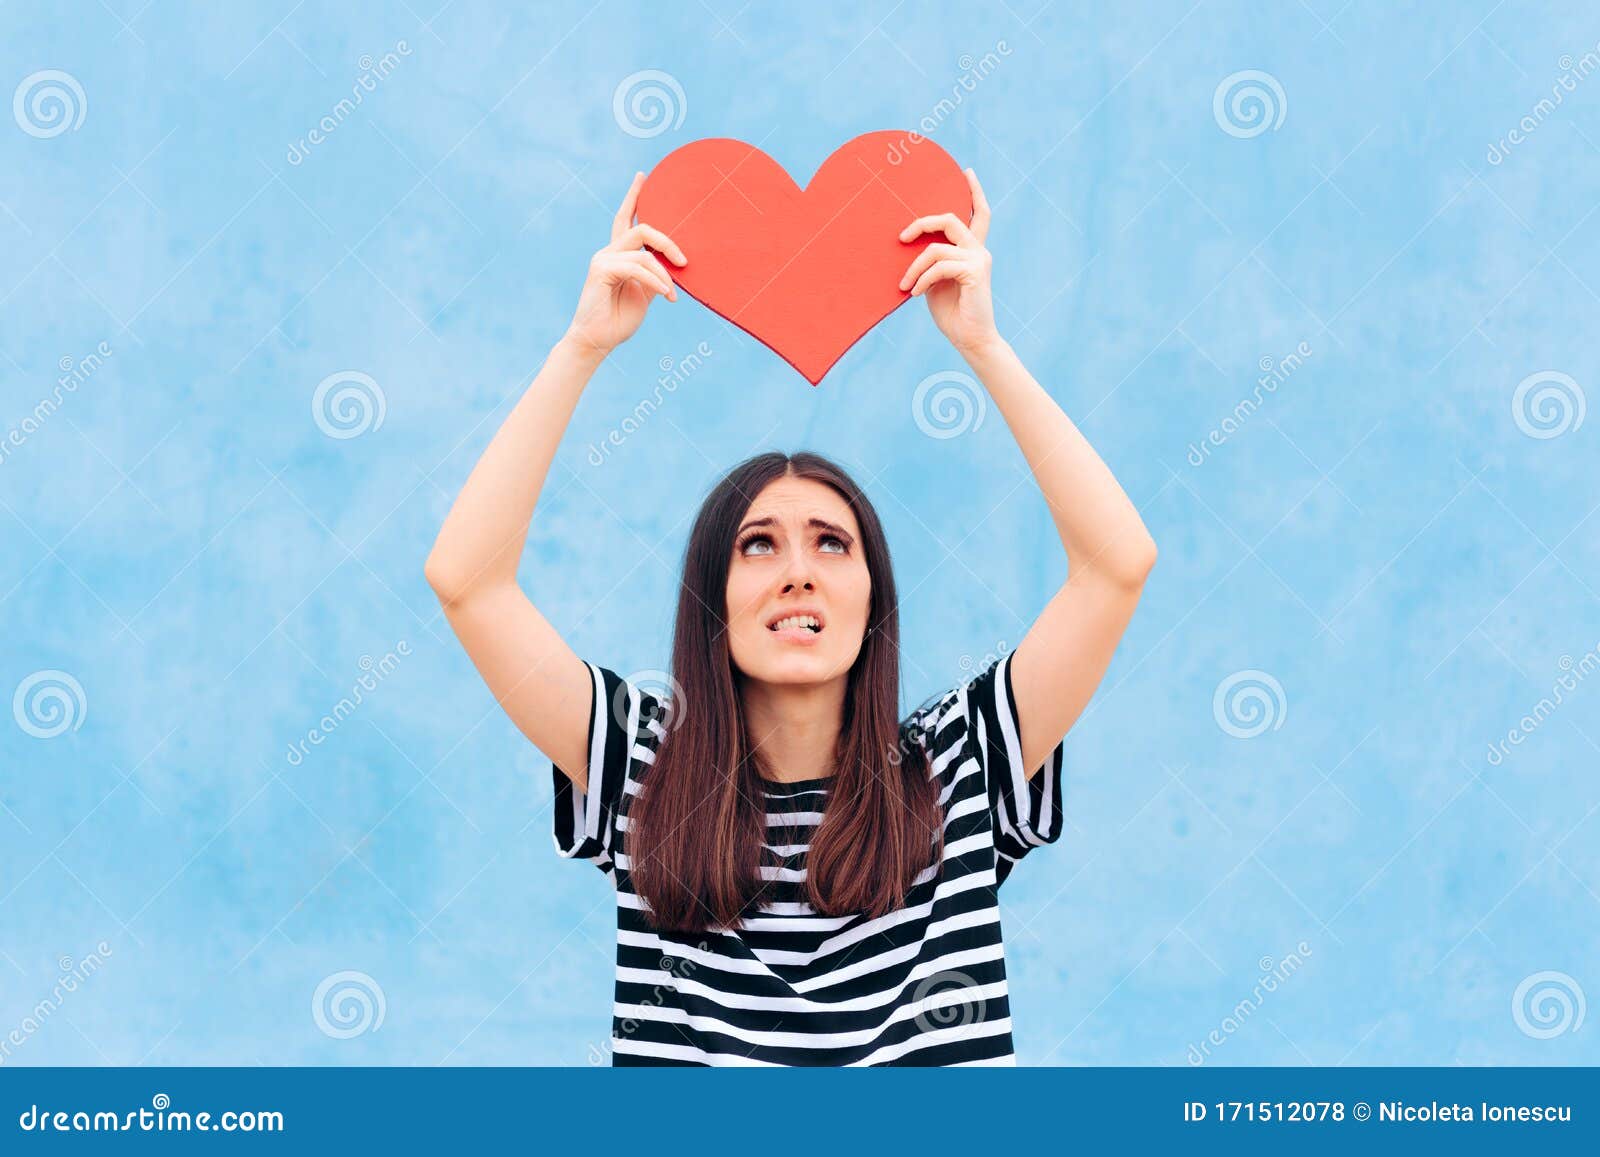 Sad Girl in Love Holding Big Red Heart Stock Photo - Image of girl ...